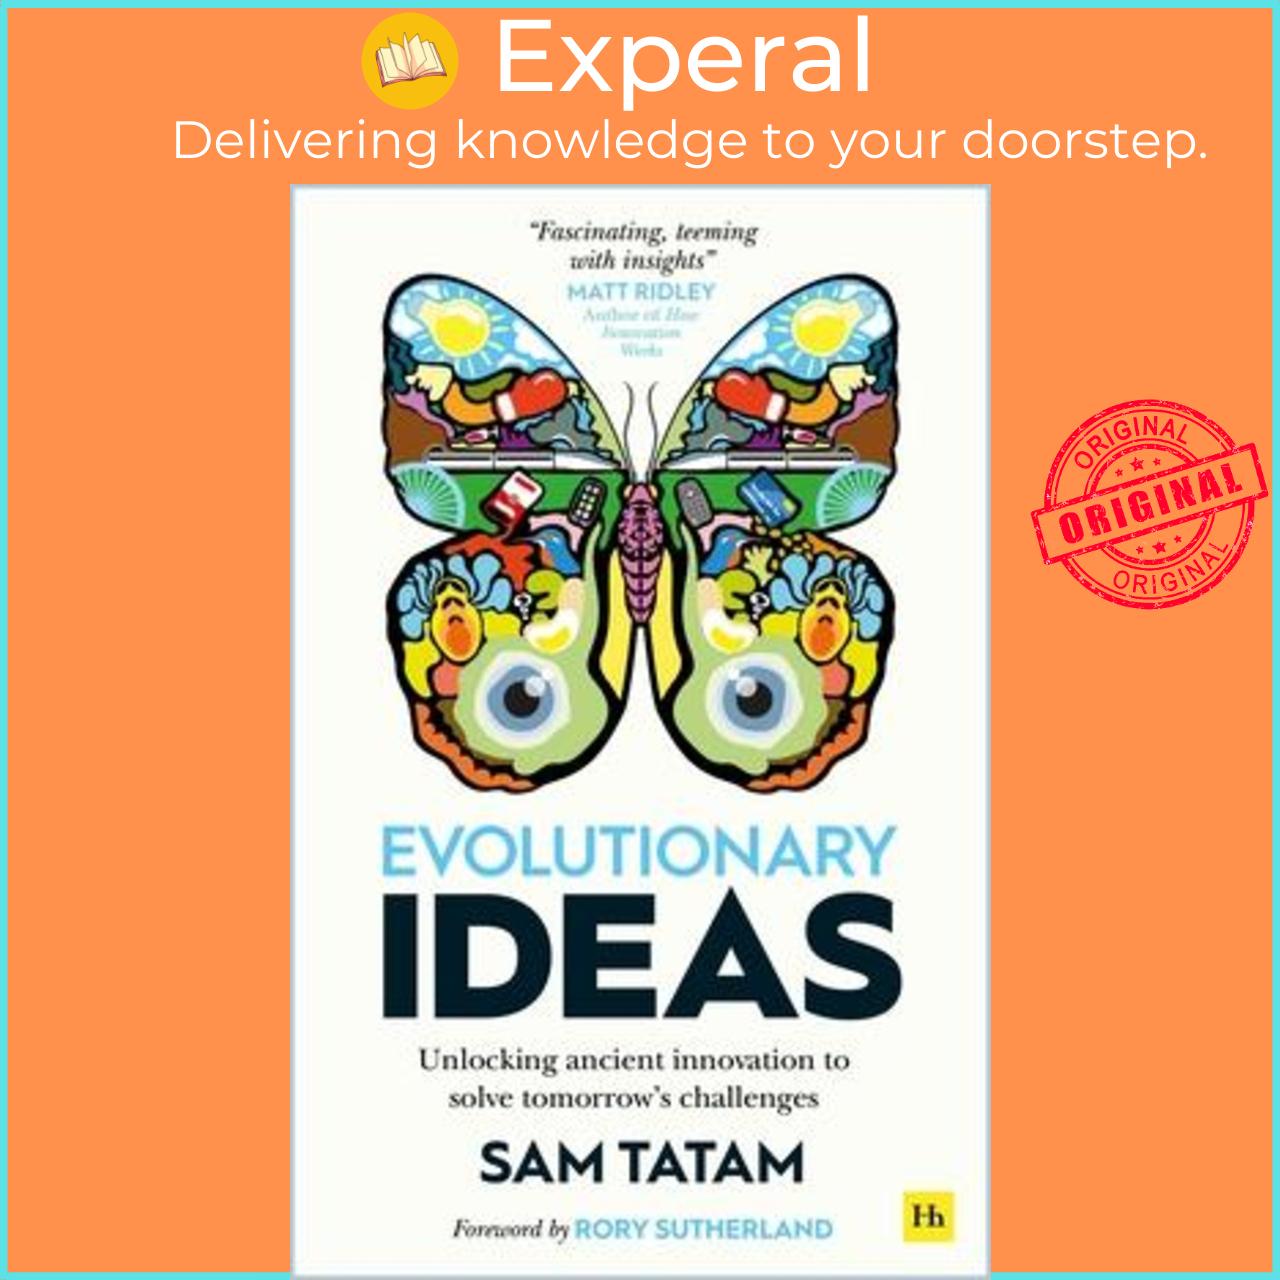 Sách - Evolutionary Ideas : Unlocking ancient innovation to solve tomorrow's challe by Sam Tatam (UK edition, paperback)